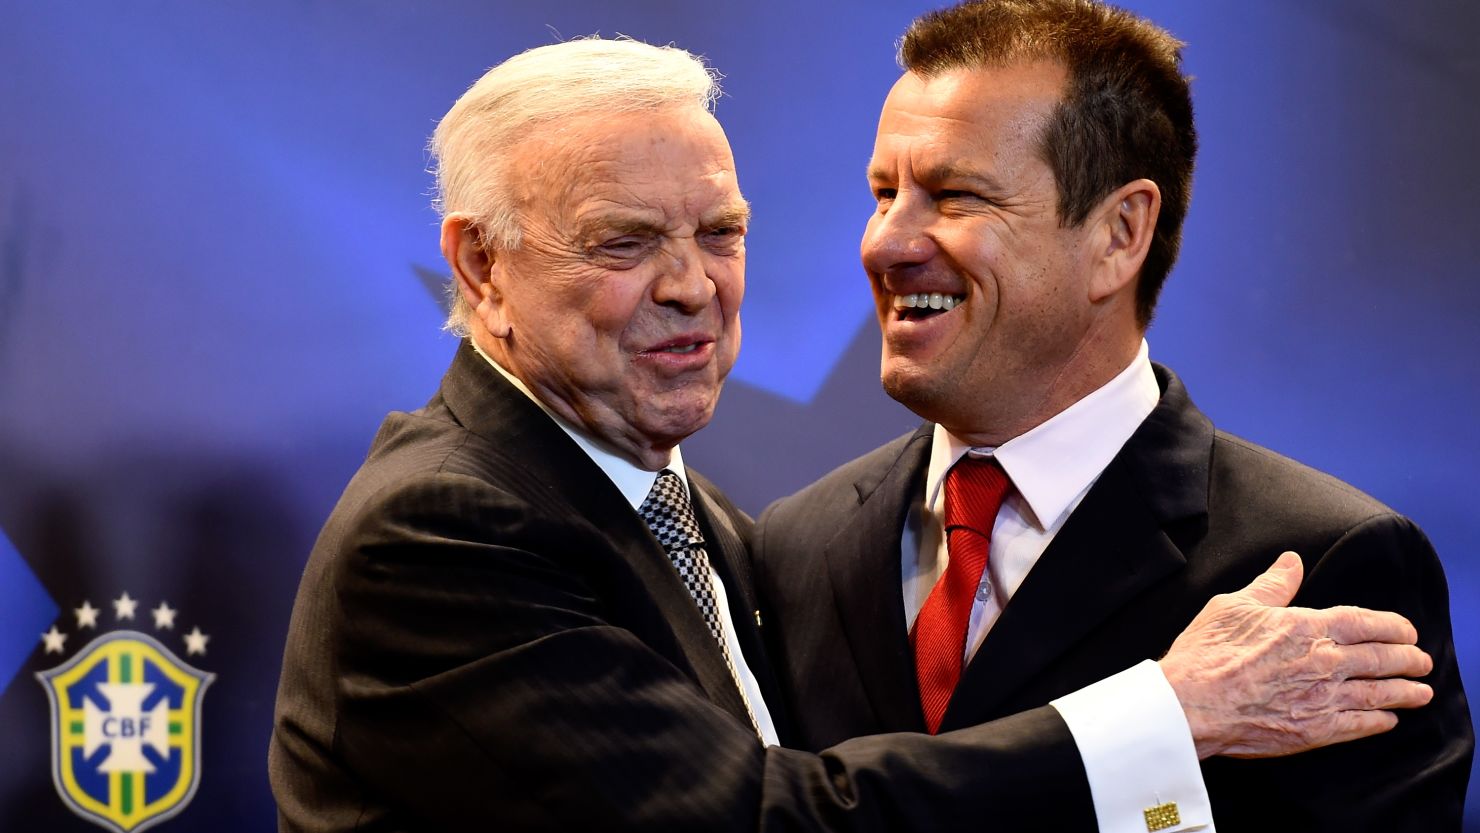 Brazil's new coach Dunga (R) with the country's football federation president Jose Maria Marin.